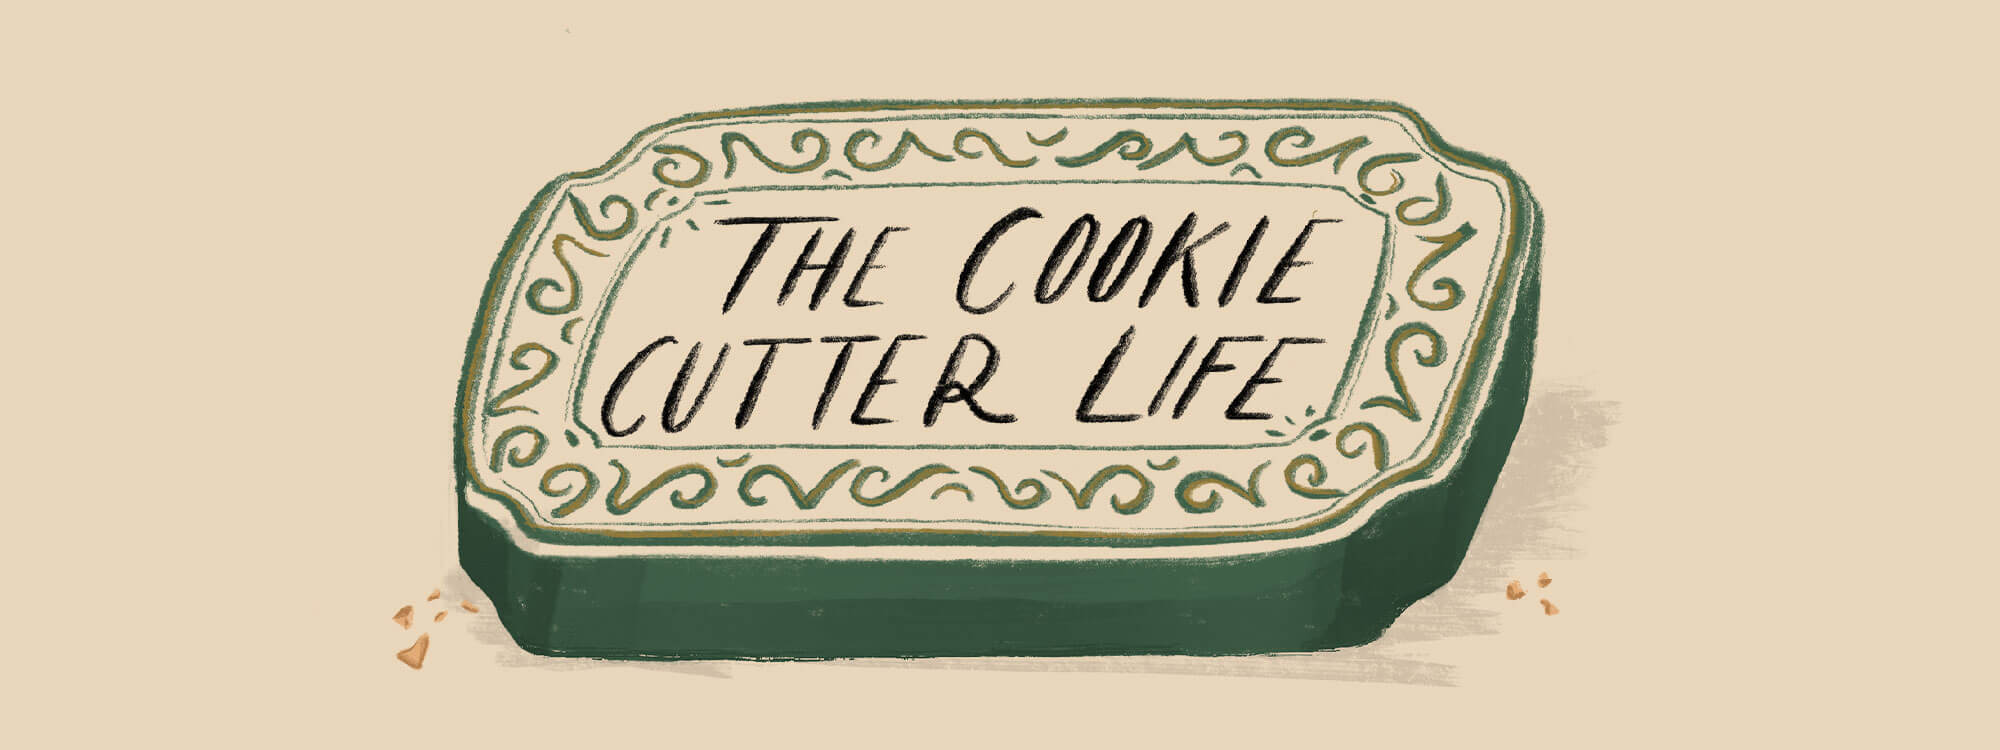 The Cookie Cutter Life